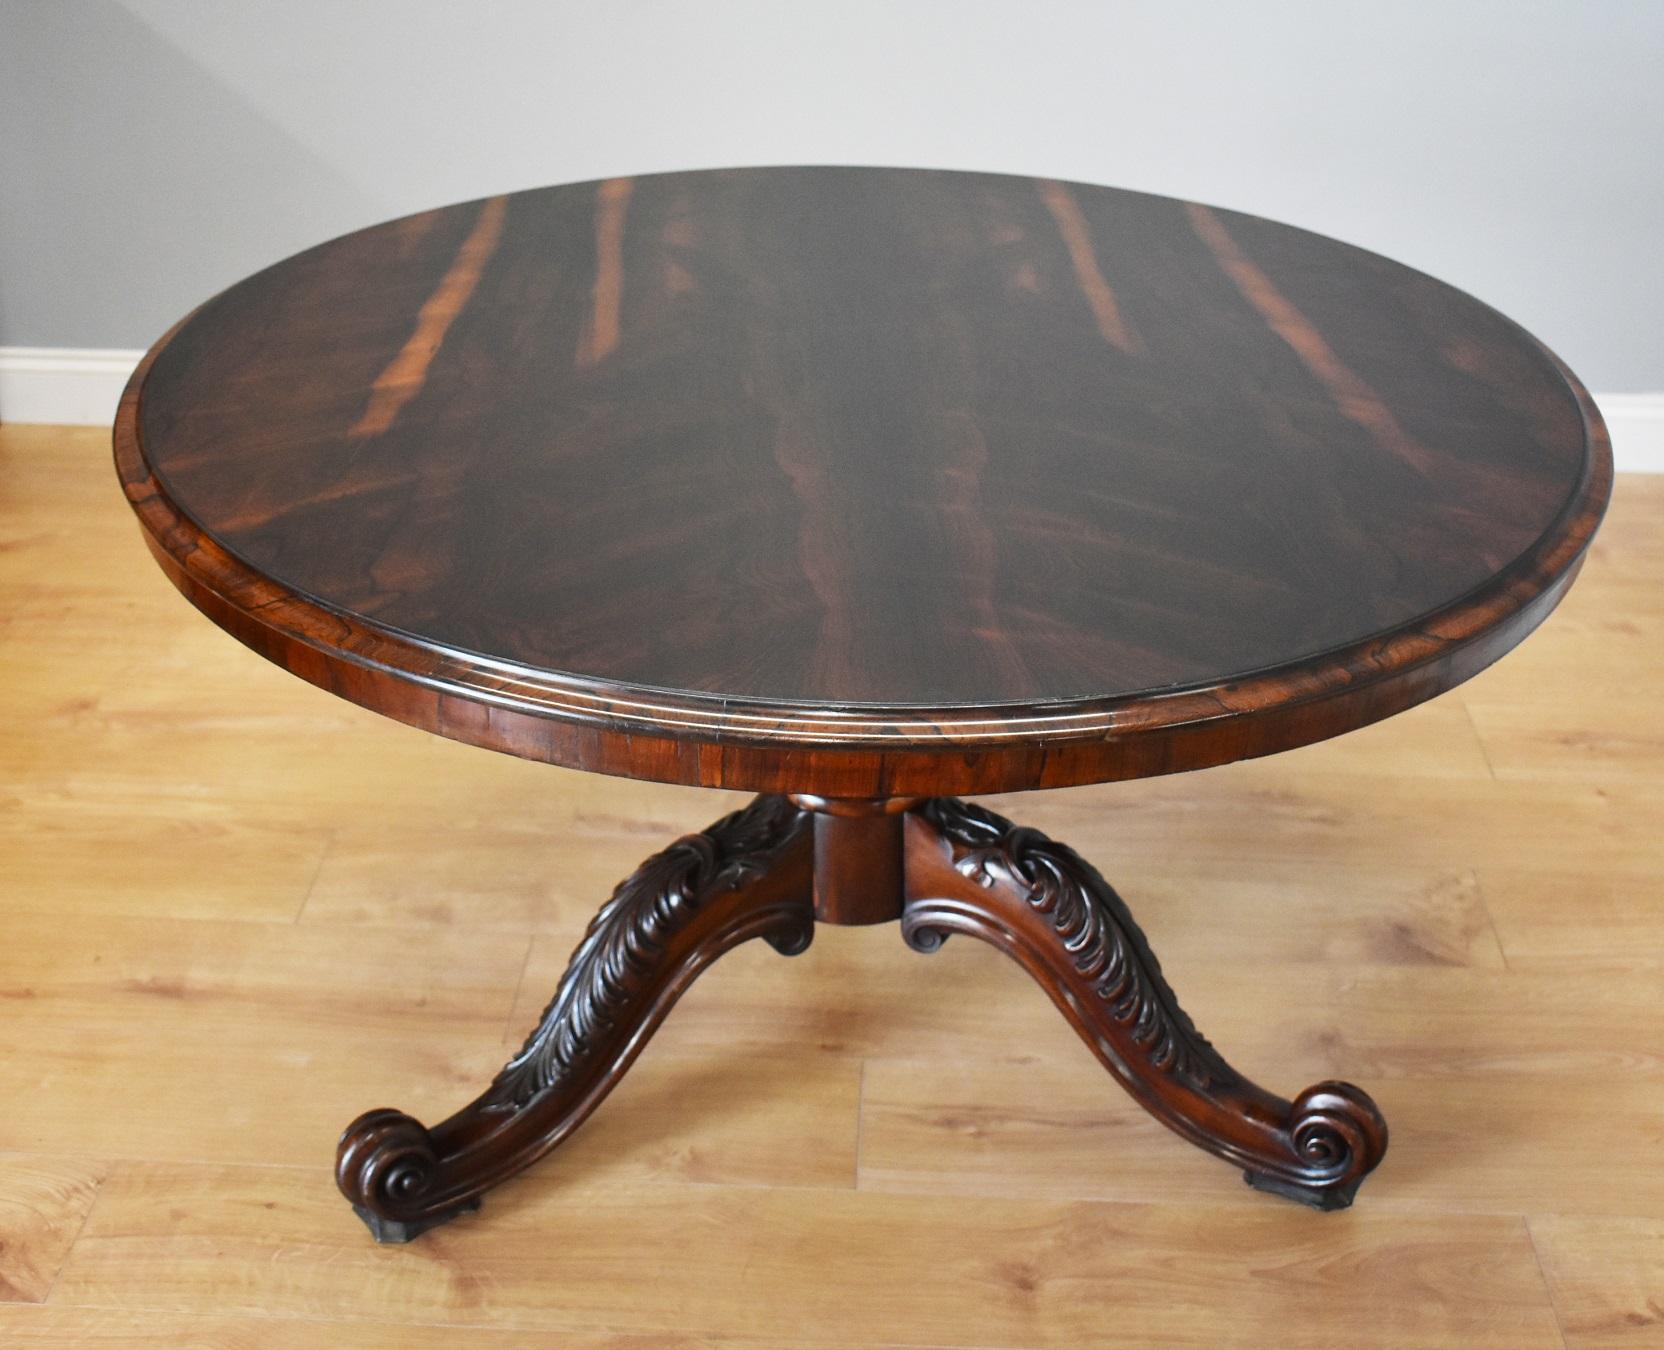 For sale is a fine quality early 19th century rosewood circular breakfast table by T Wilson of Great Queen Street, London. Having a superbly figured rosewood top, above an ornately carved base, standing on three beautifully carved legs terminating